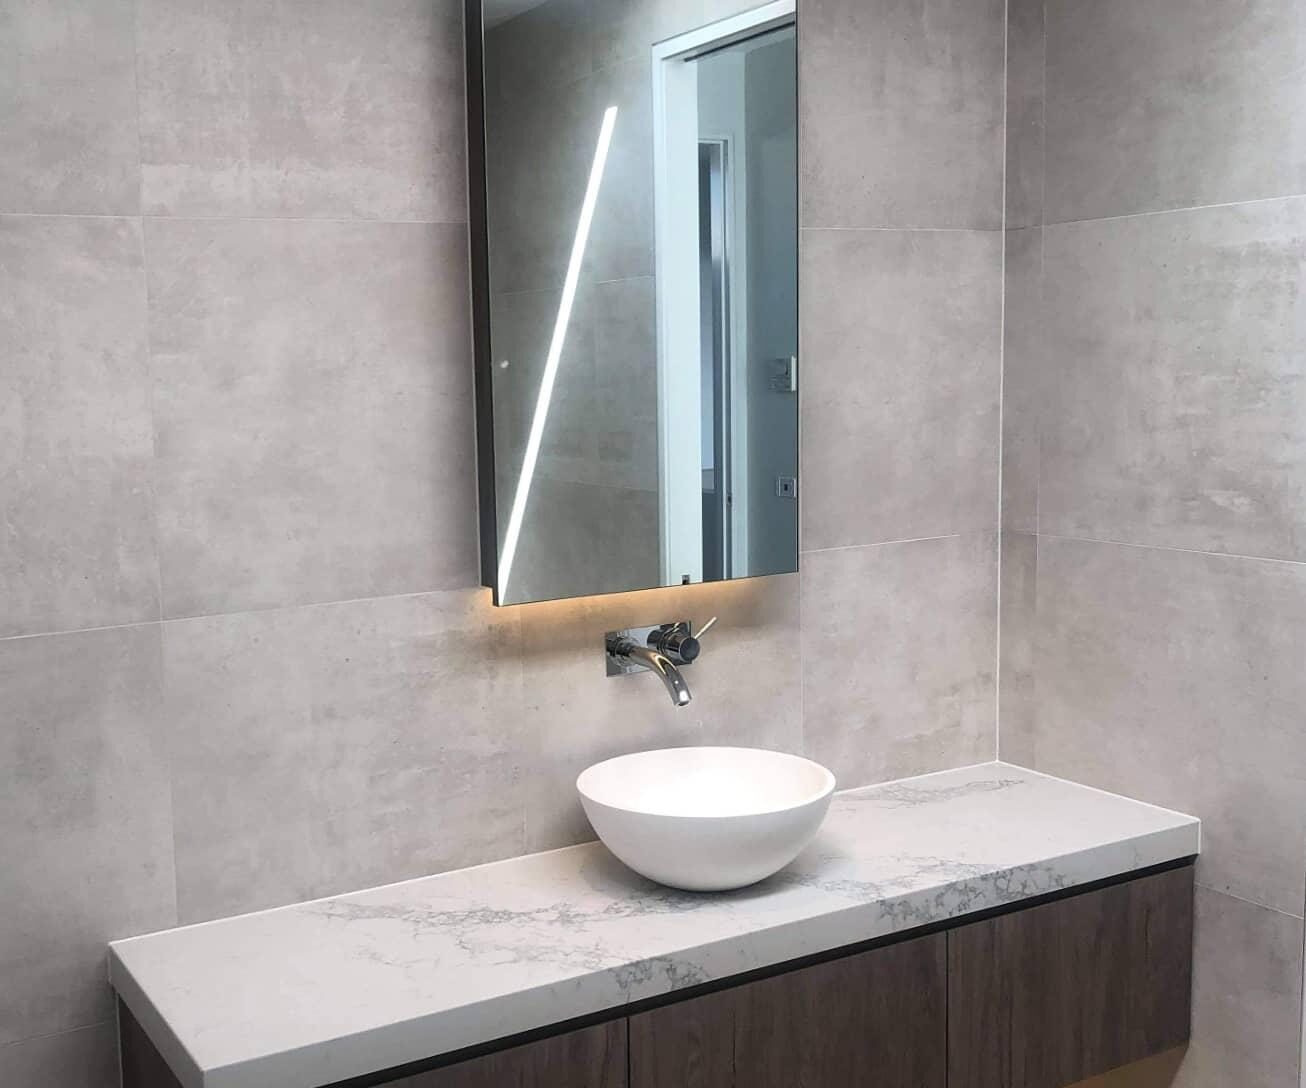 5 Tips to Find the Best Bathroom Caulking Specialists in Melbourne